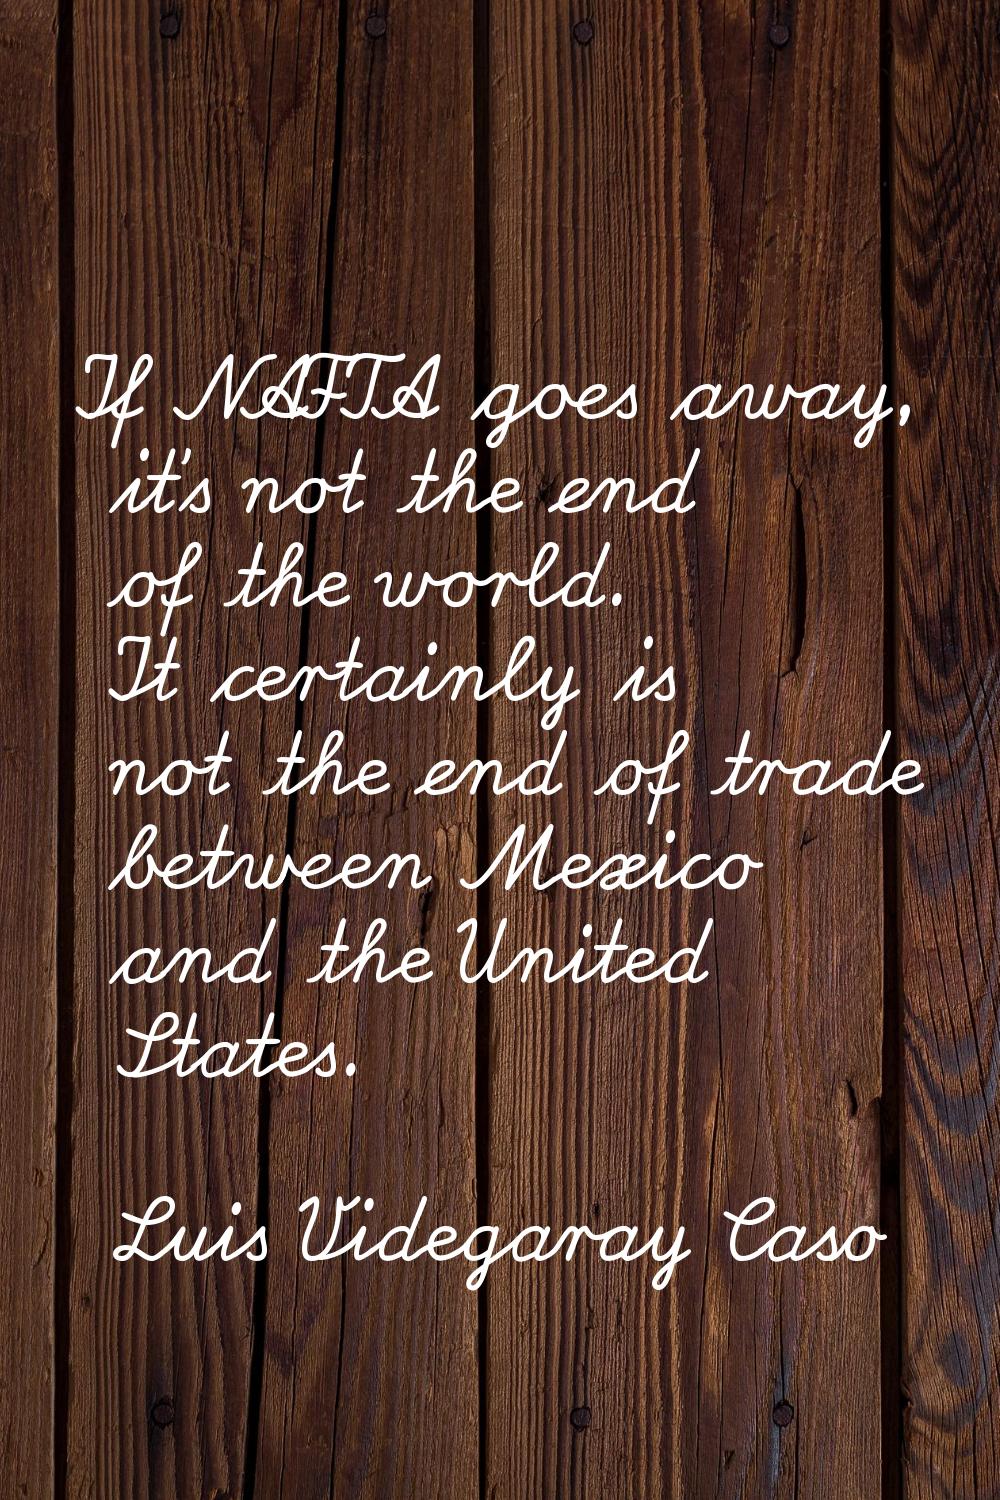 If NAFTA goes away, it's not the end of the world. It certainly is not the end of trade between Mex